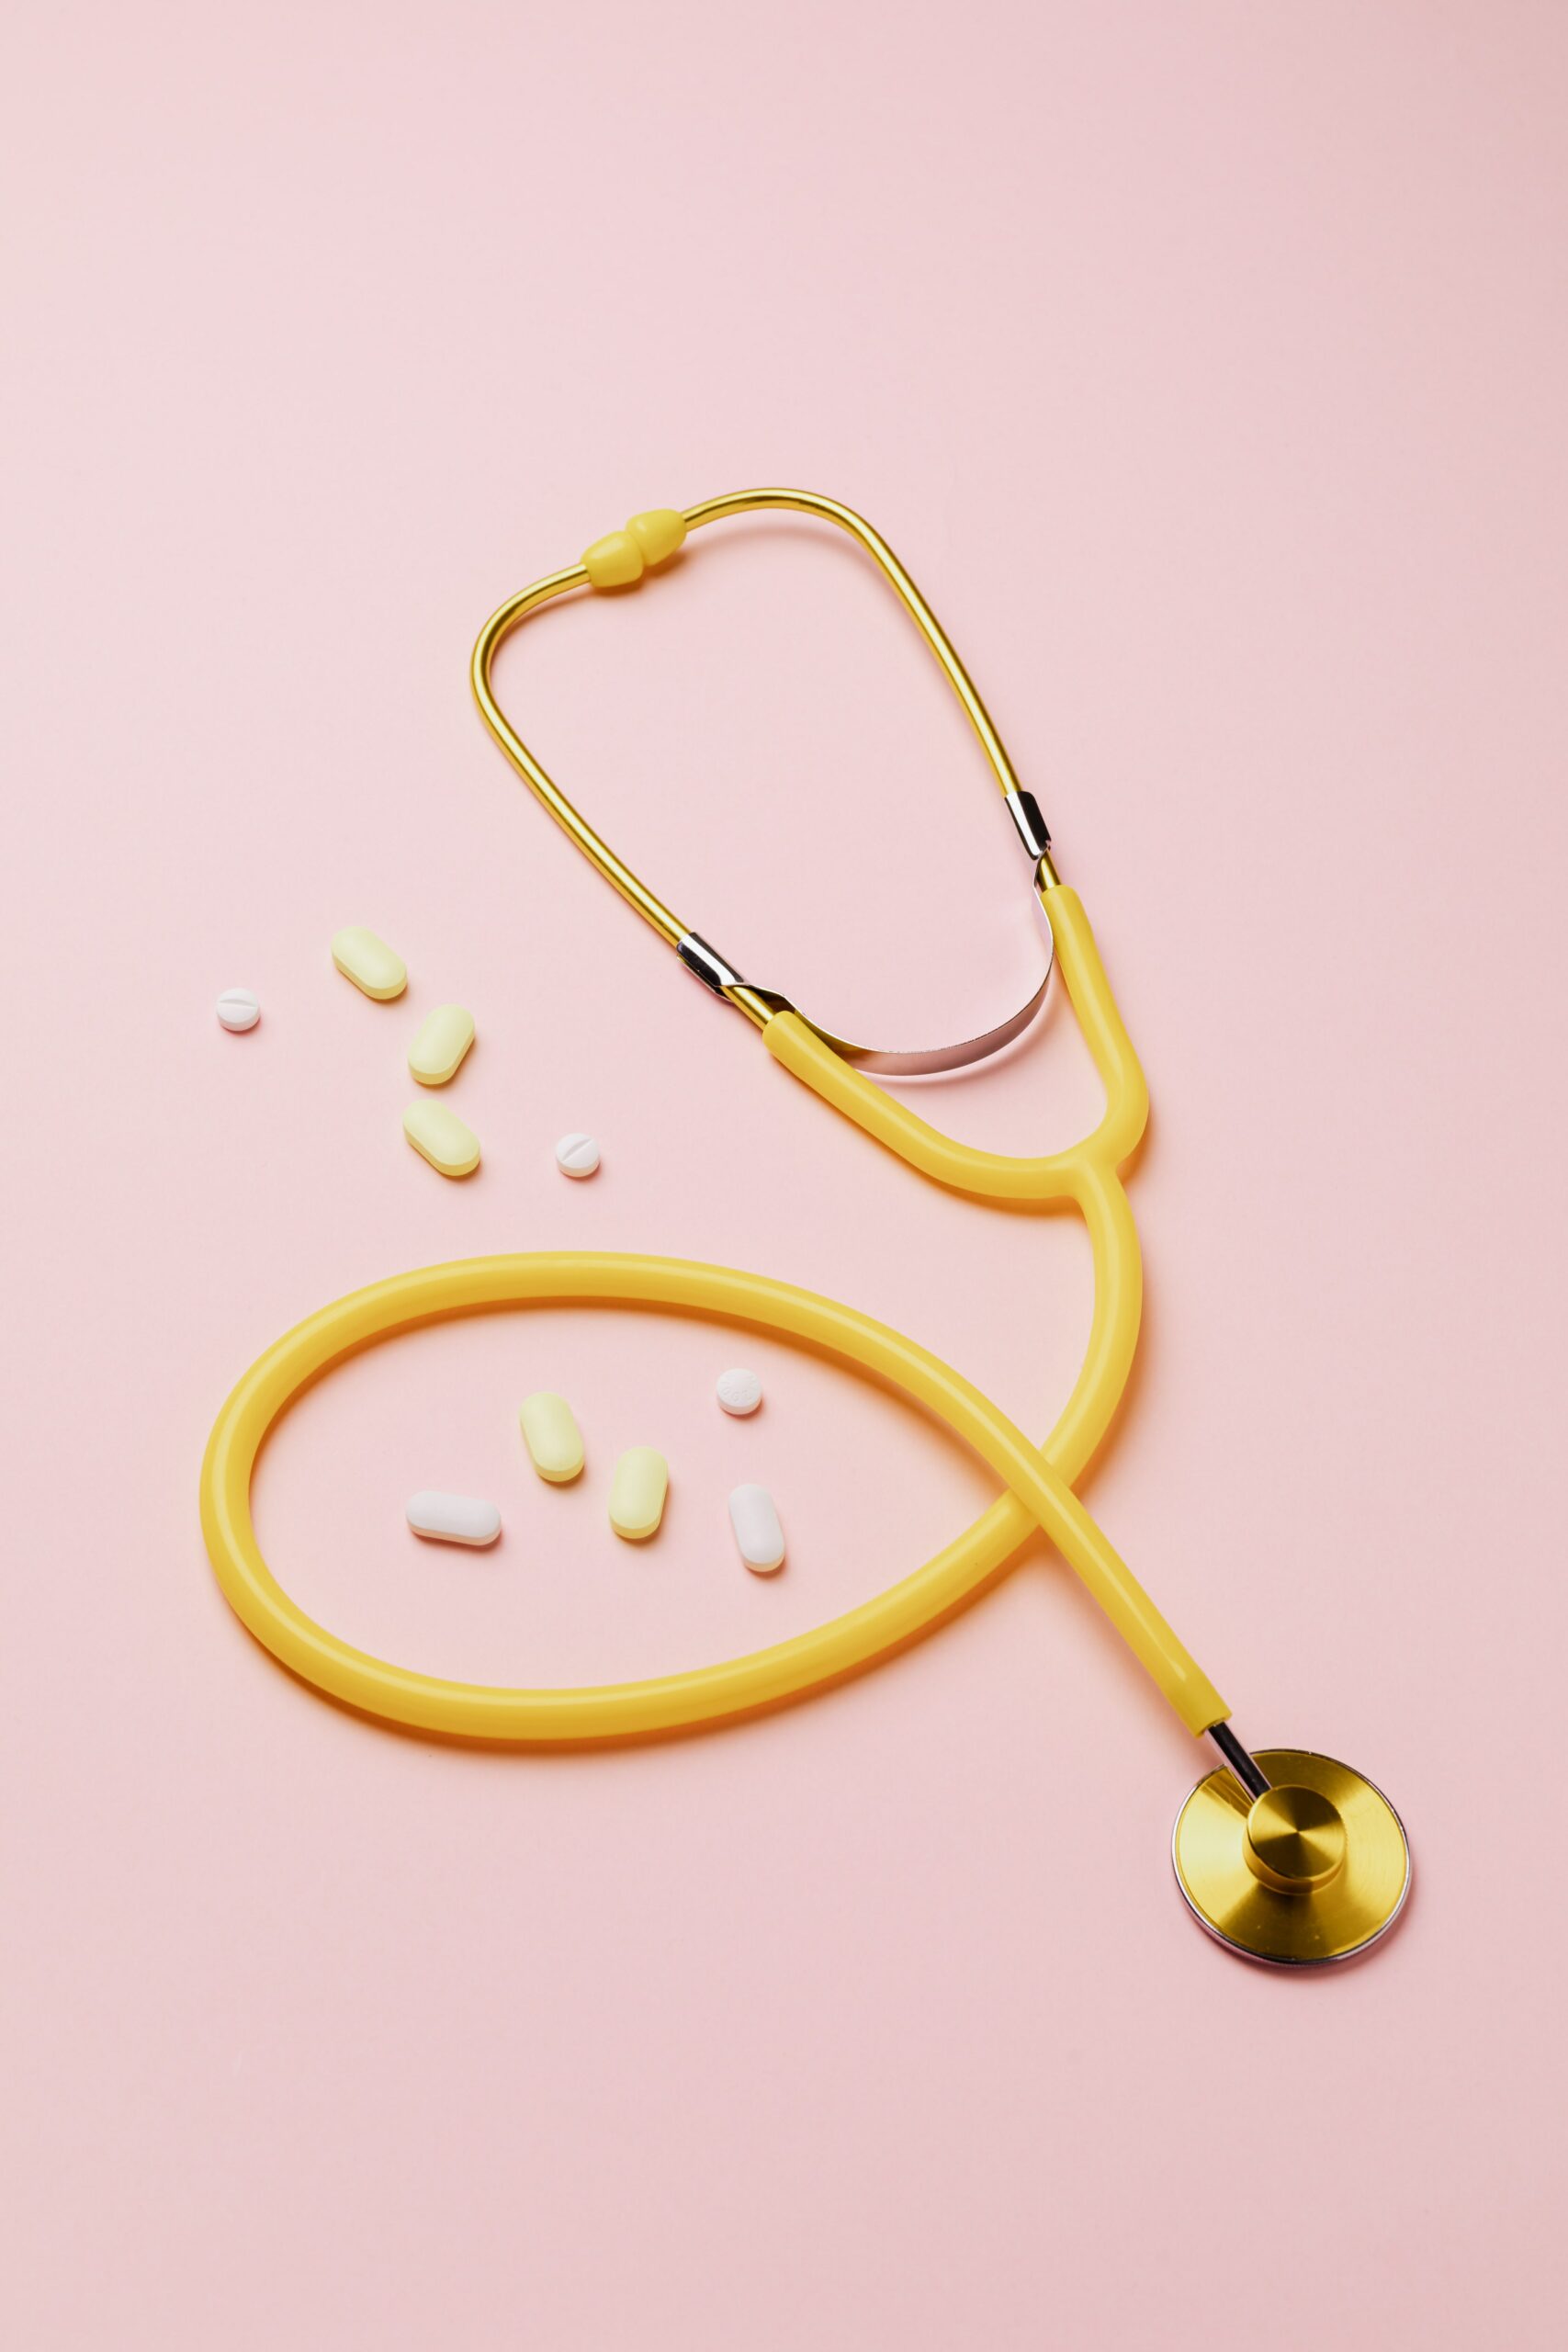 Multivitamin pills accompanied by a stethoscope, symbolizing the potential preventative benefits they offer against the onset of Alzheimer's disease.